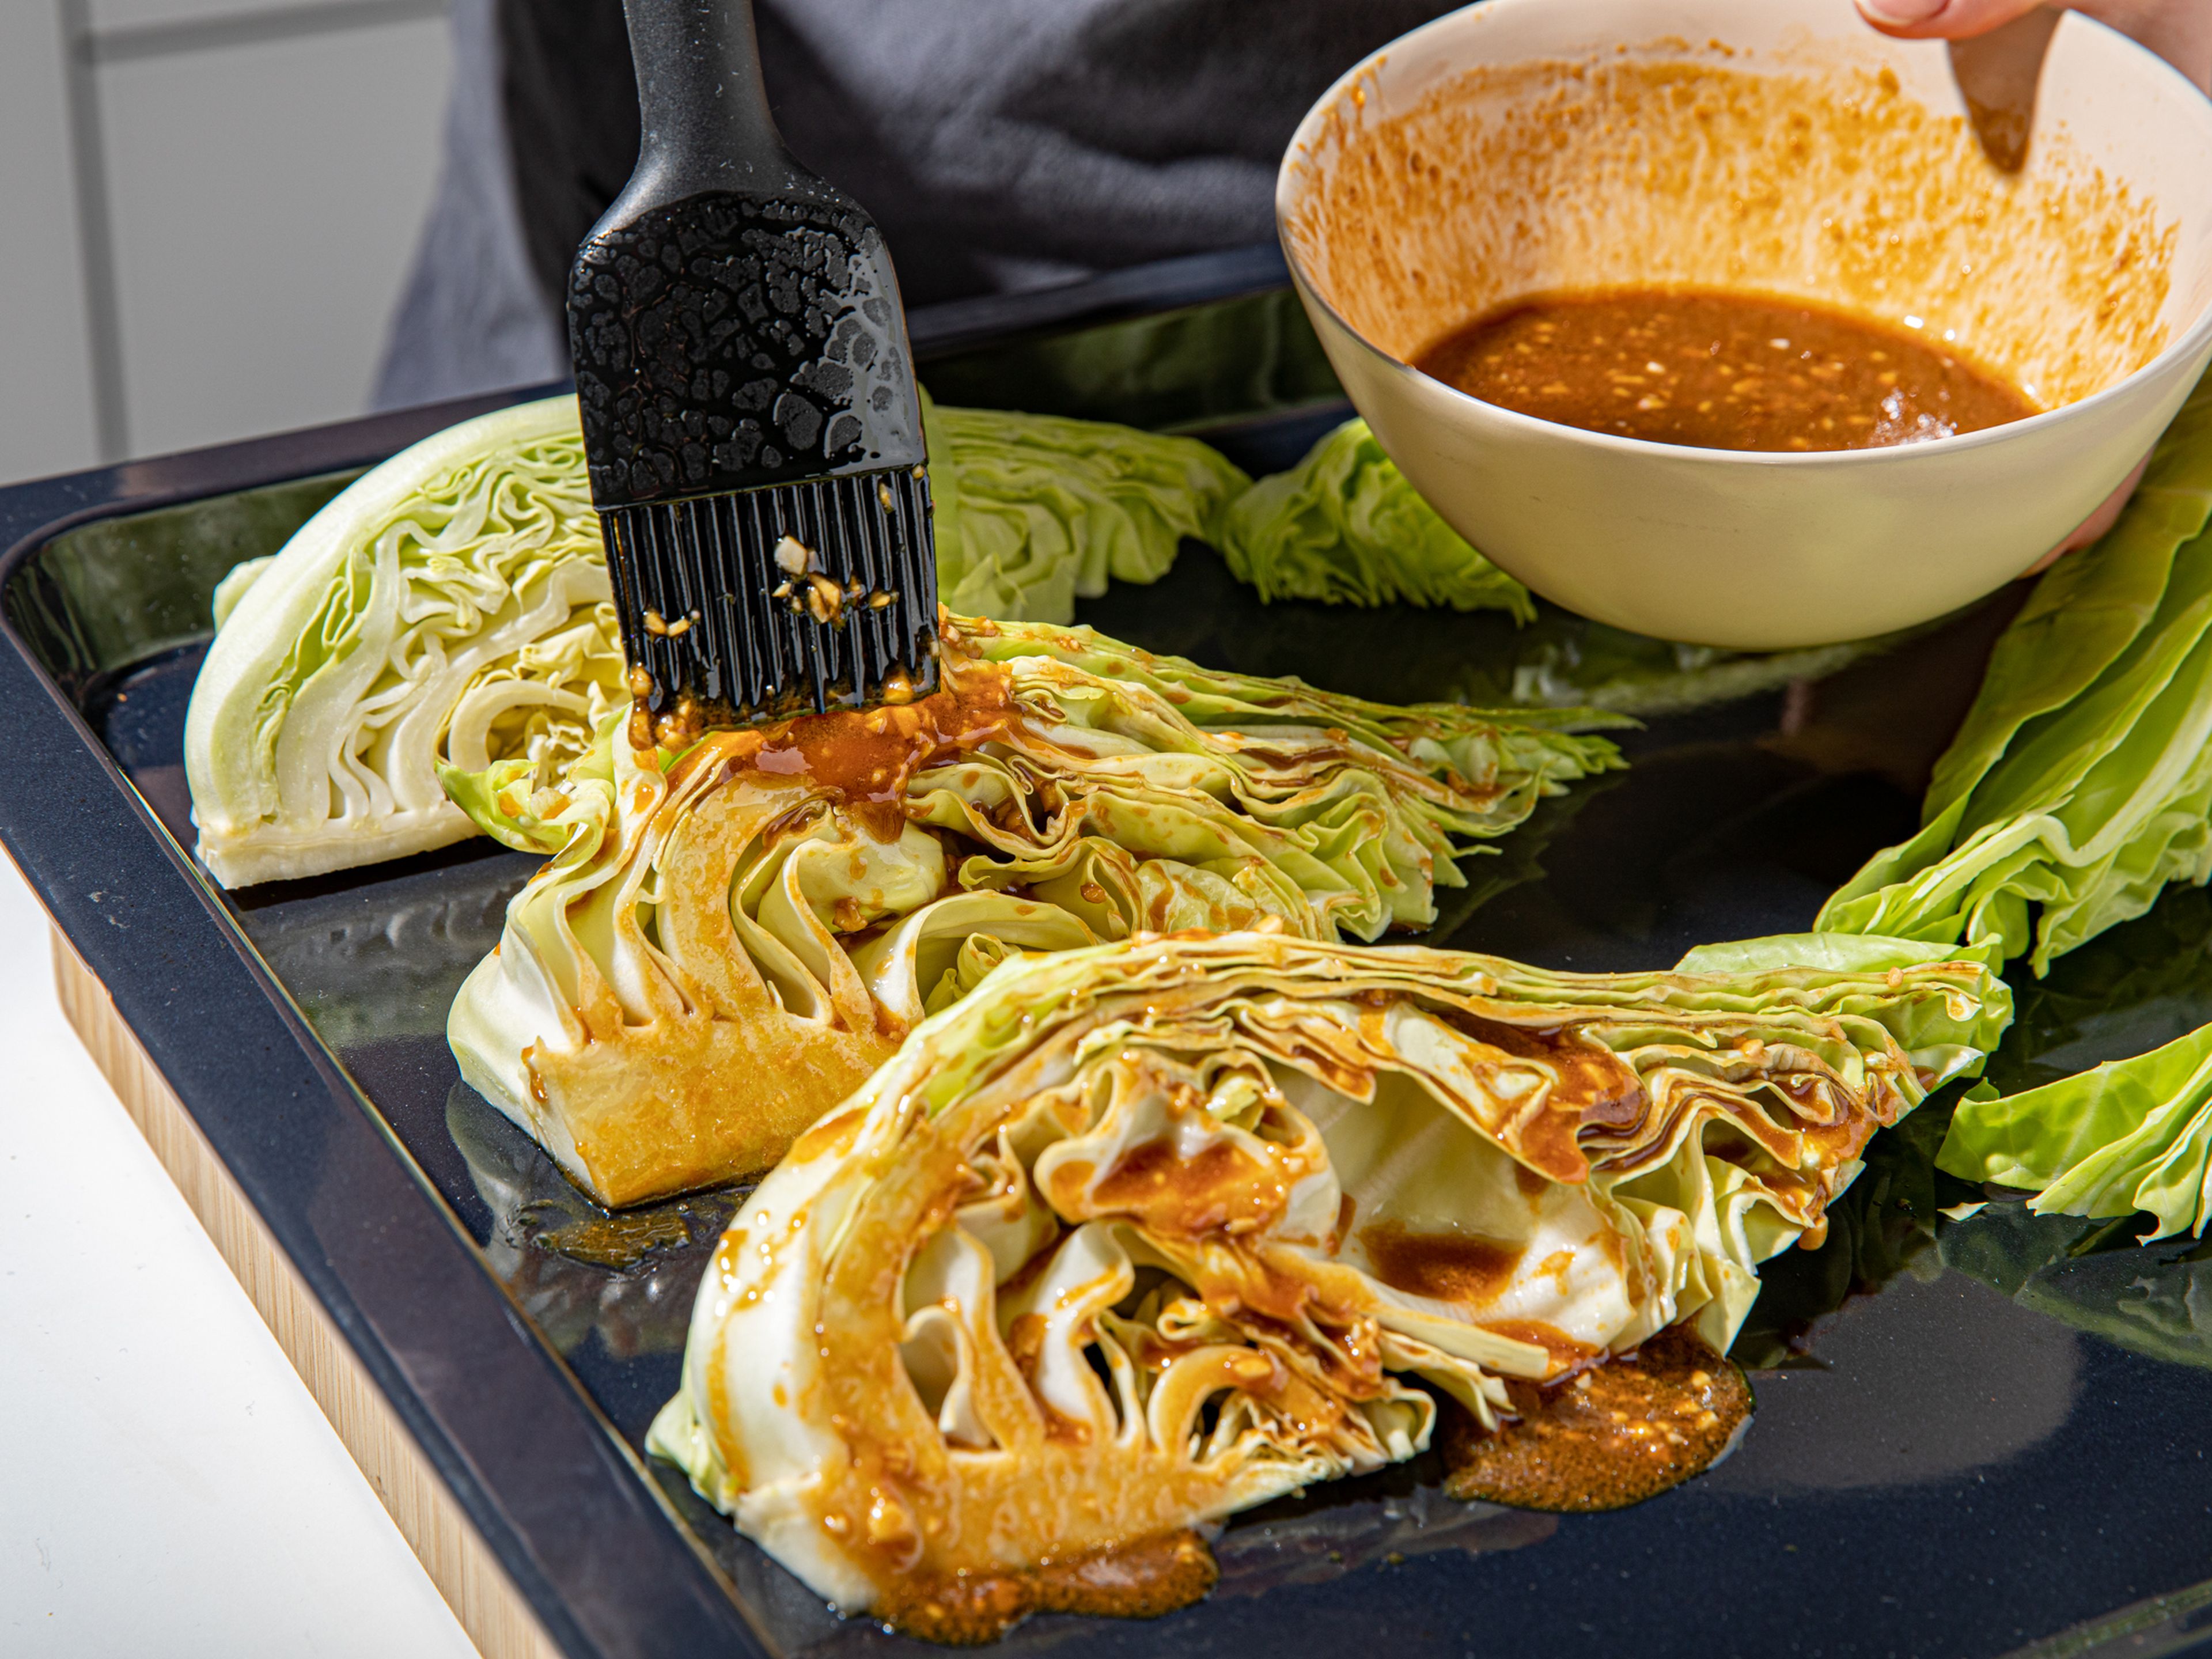 Arrange the cabbage wedges on a baking sheet and brush with all the marinade. Transfer to the oven and roast for approx. 35 min. Halfway through, brush the cabbage with any marinade that’s slipped off onto the baking sheet. Arrange cabbage on a serving plate, and sprinkle with sesame seeds and scallions before serving. Enjoy!